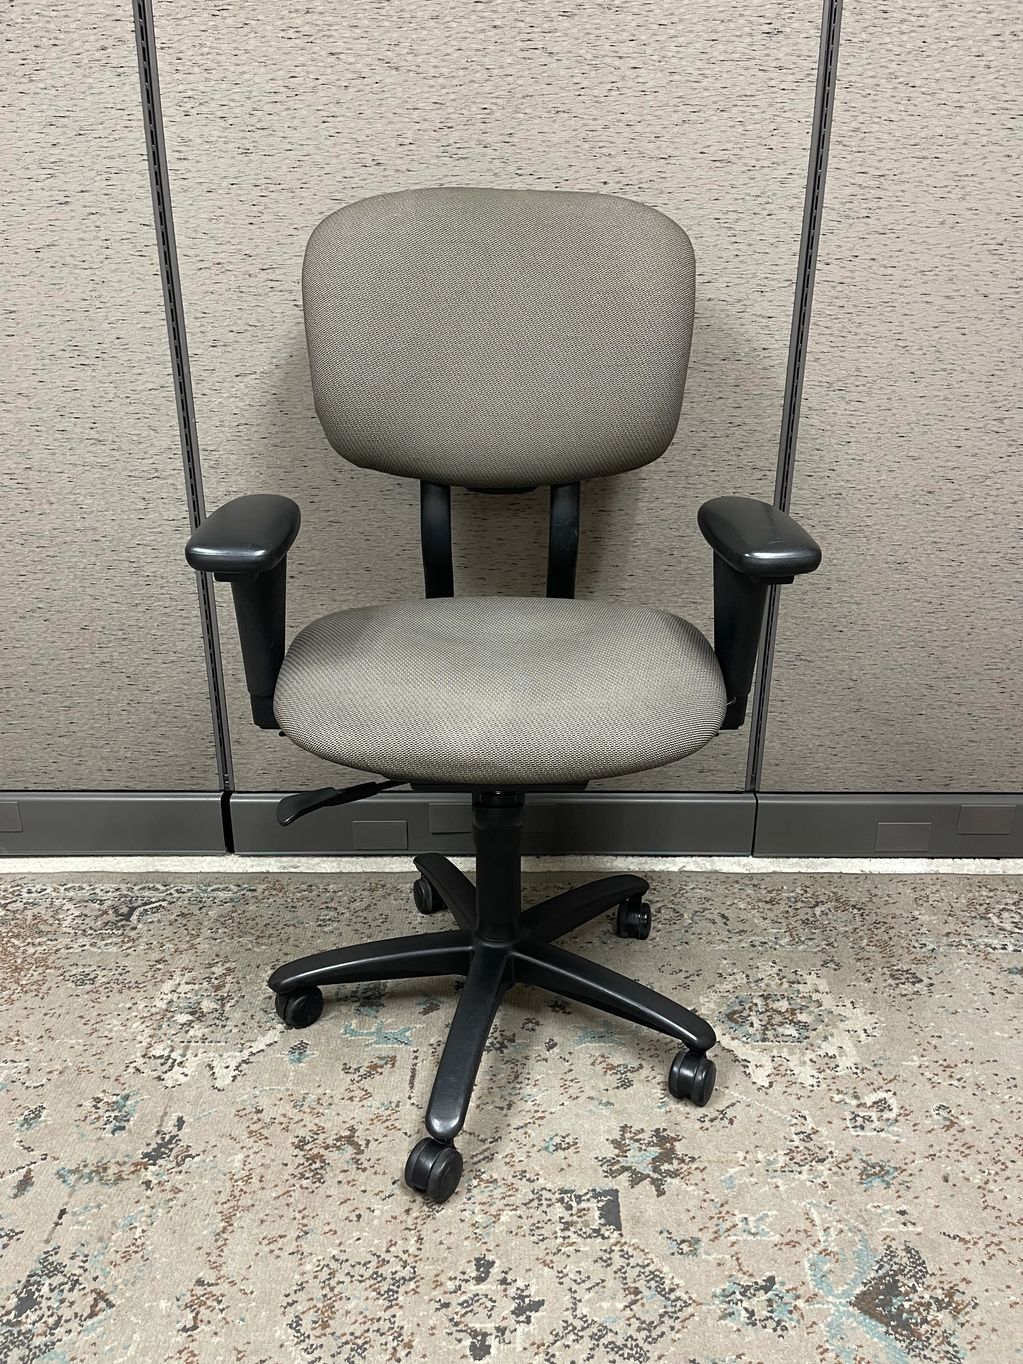 DURABLE TASK CHAIR ON SALE FOR $75.00